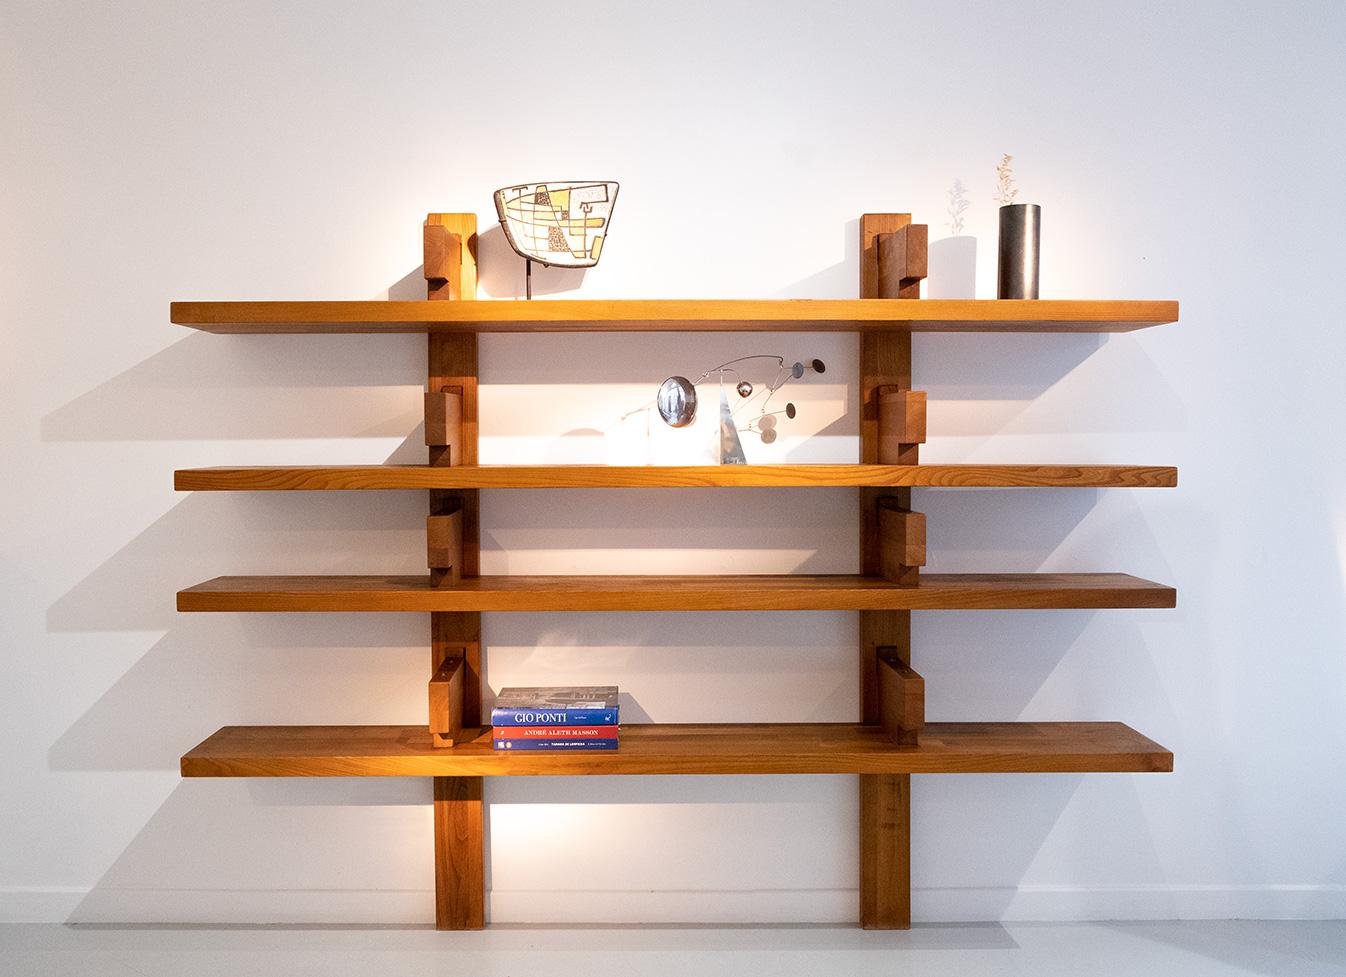 Pierre Chapo (1927-1987)
?
Wonderful B17 B bookcase in solid elm.
One of the most beautiful creations of Pierre Chapo with an aerial and minimalist design as interesting as the realizations of Charlotte Perriand.
Great quality of manufacture and